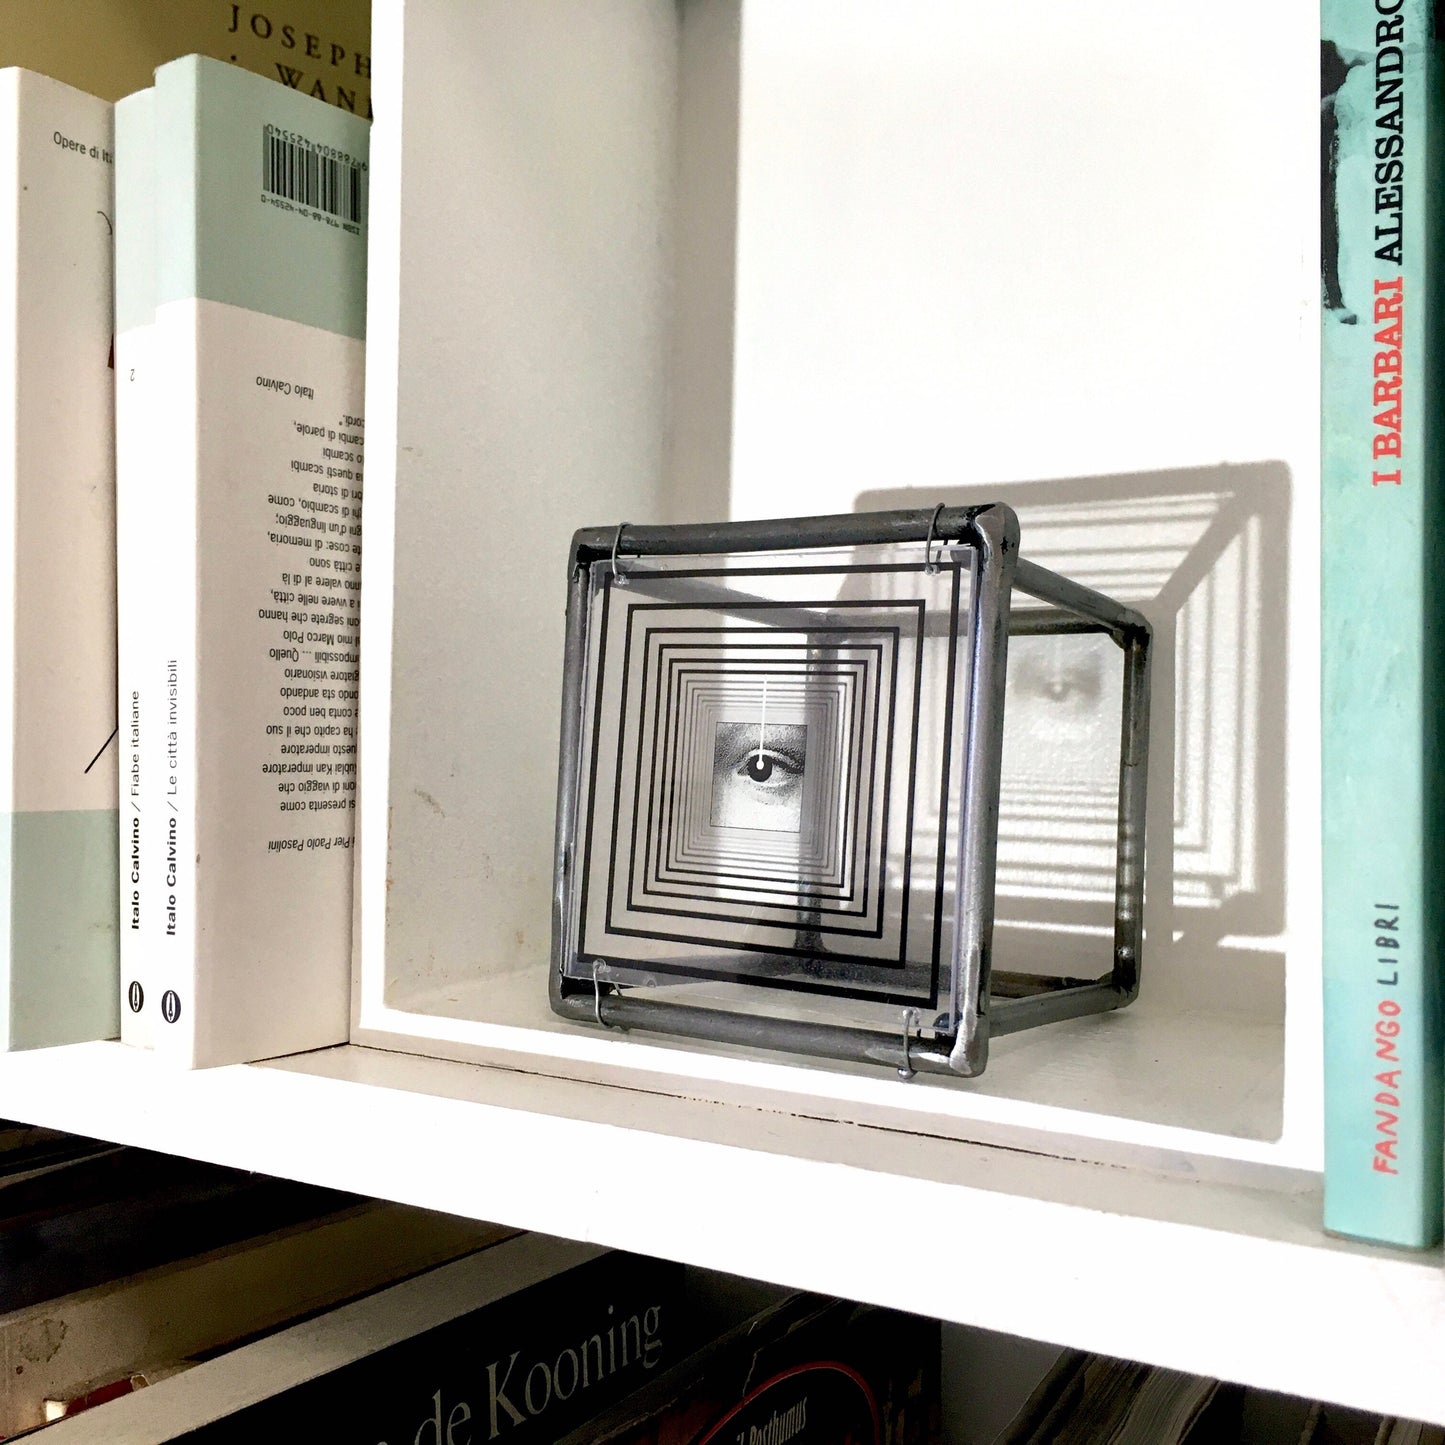 Home office decor with Op art style collage, original art composition. Metal wall, shadow art, small sculpture. Christmas, desk decor gift. - artandshadow